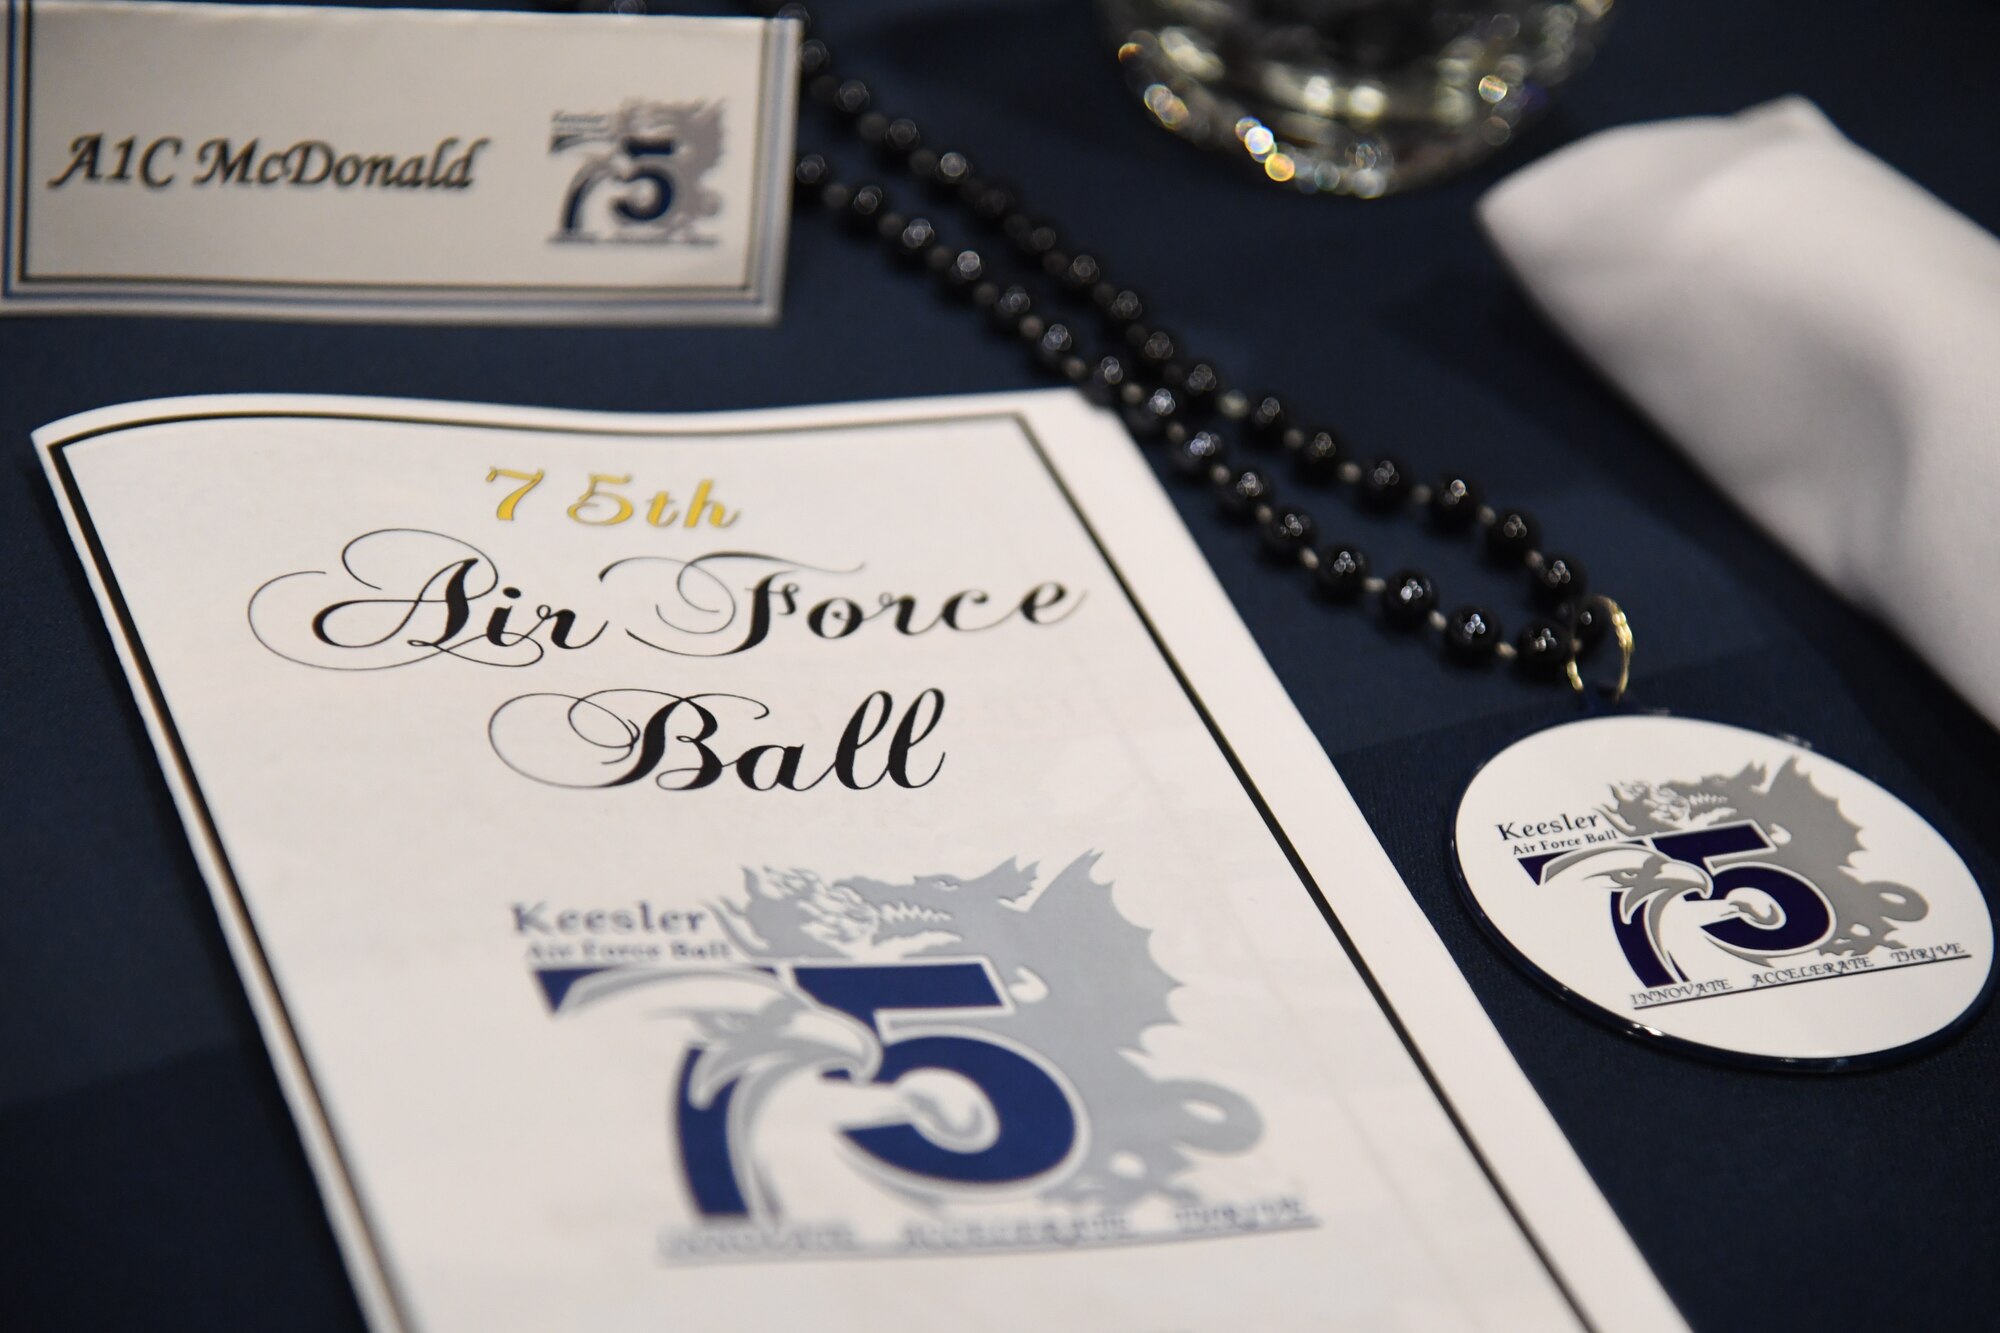 An event program is displayed during the Keesler Air Force Ball inside the IP Casino Resort Spa at Biloxi, Mississippi, Sept. 17, 2022. The event, which celebrated the Air Force's 75th birthday, also included a cake cutting ceremony. (U.S. Air Force photo by Kemberly Groue)